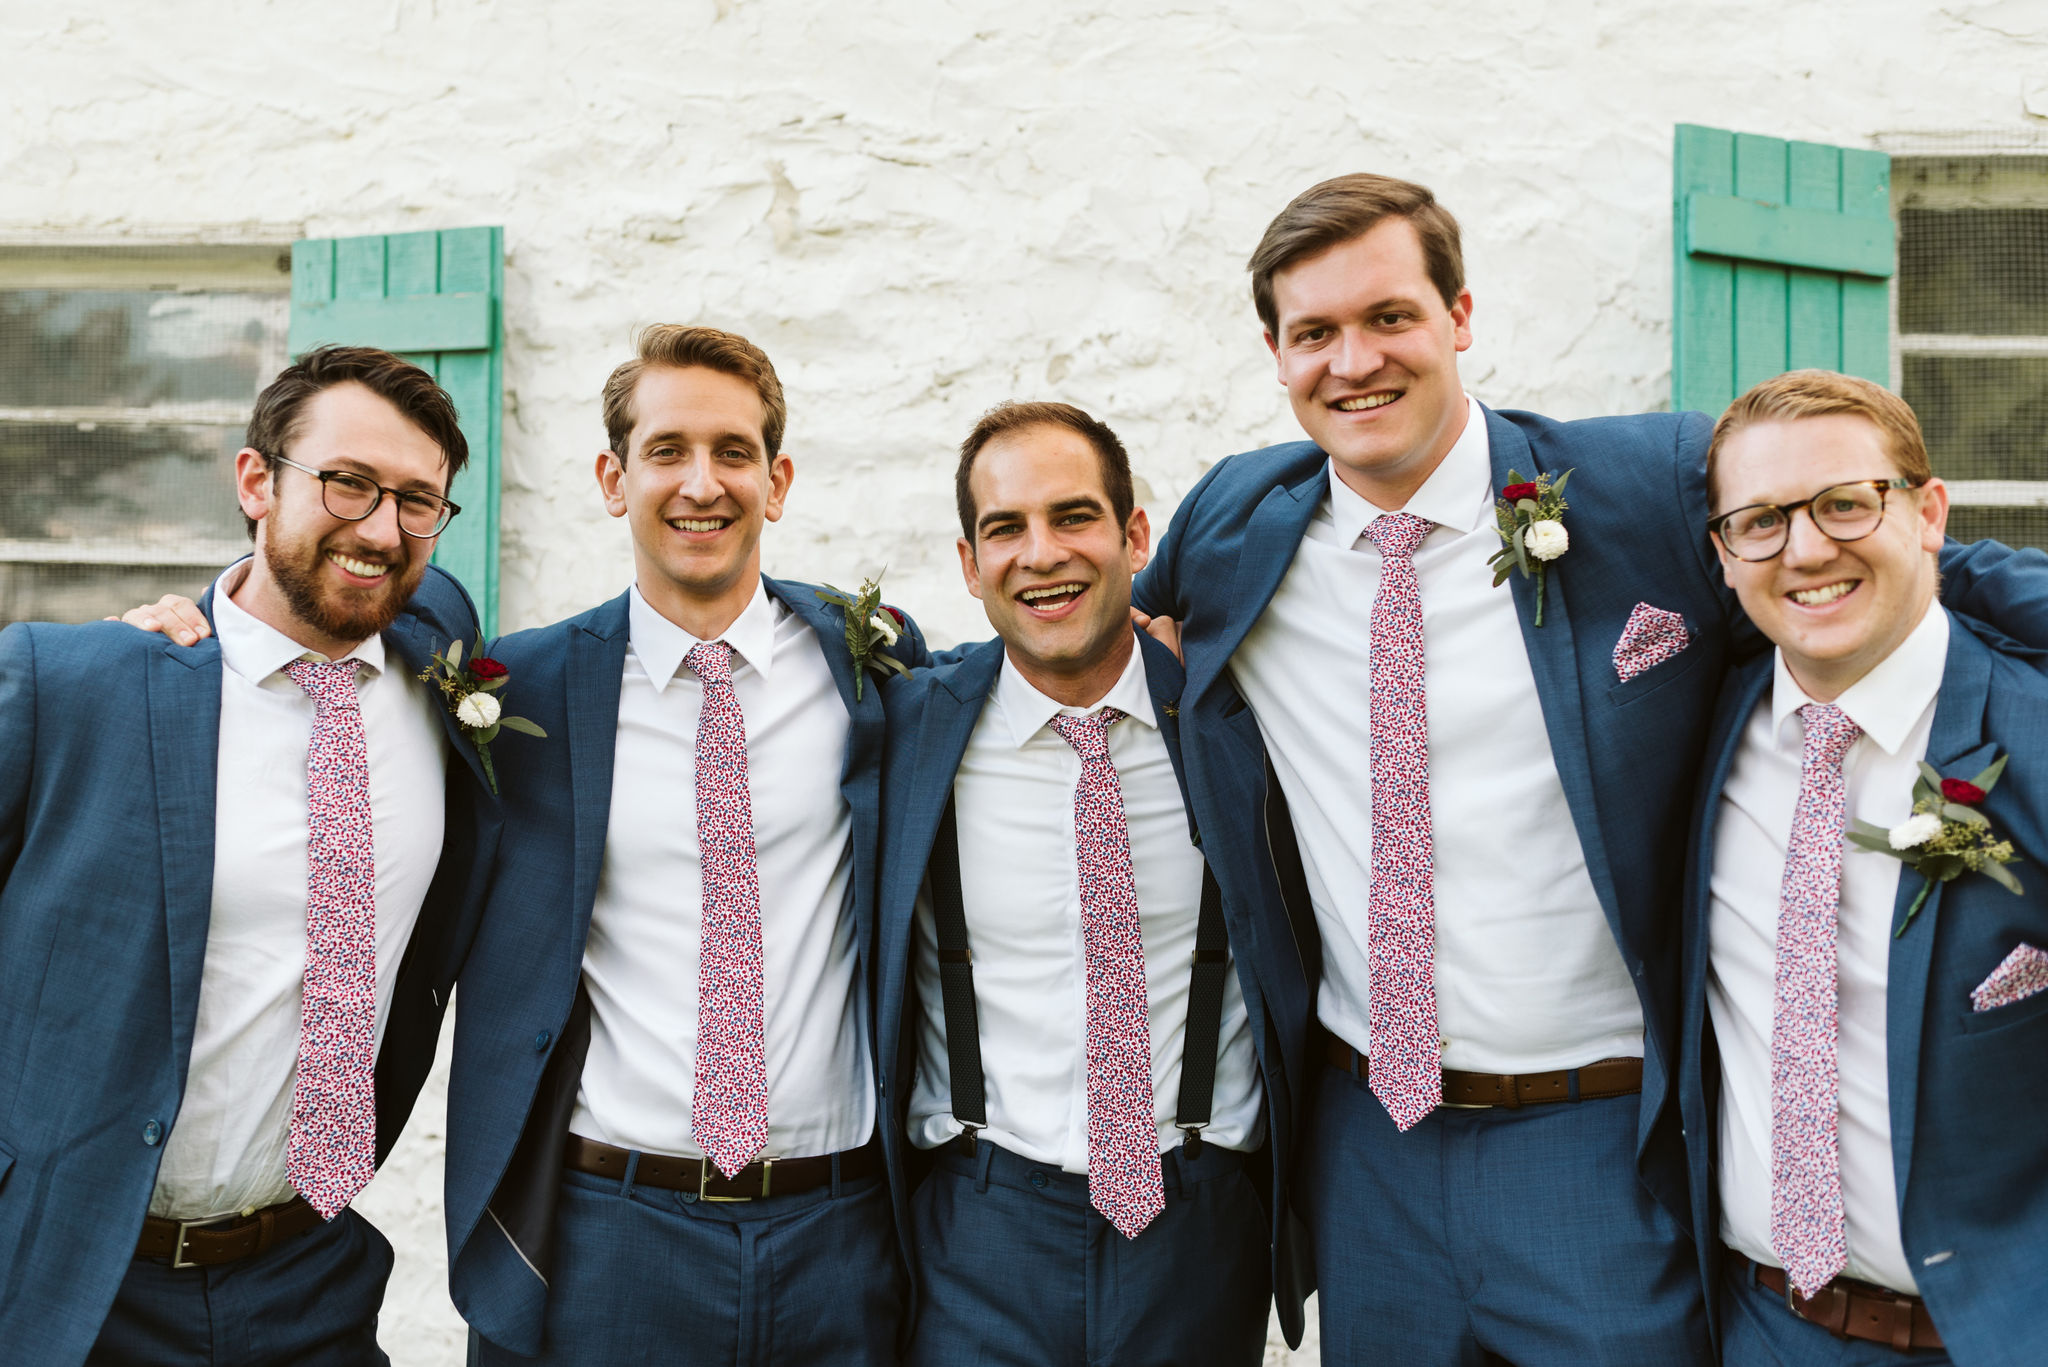  Phoenix Maryland, Baltimore Wedding Photographer, Eagle’s Nest Country Club, Classic, Romantic, Portrait of Groom with Groomsmen, Generation Tux Blue Suits, Knotty Tie Ties and Pocketsquares, Red and White Boutonnieres  